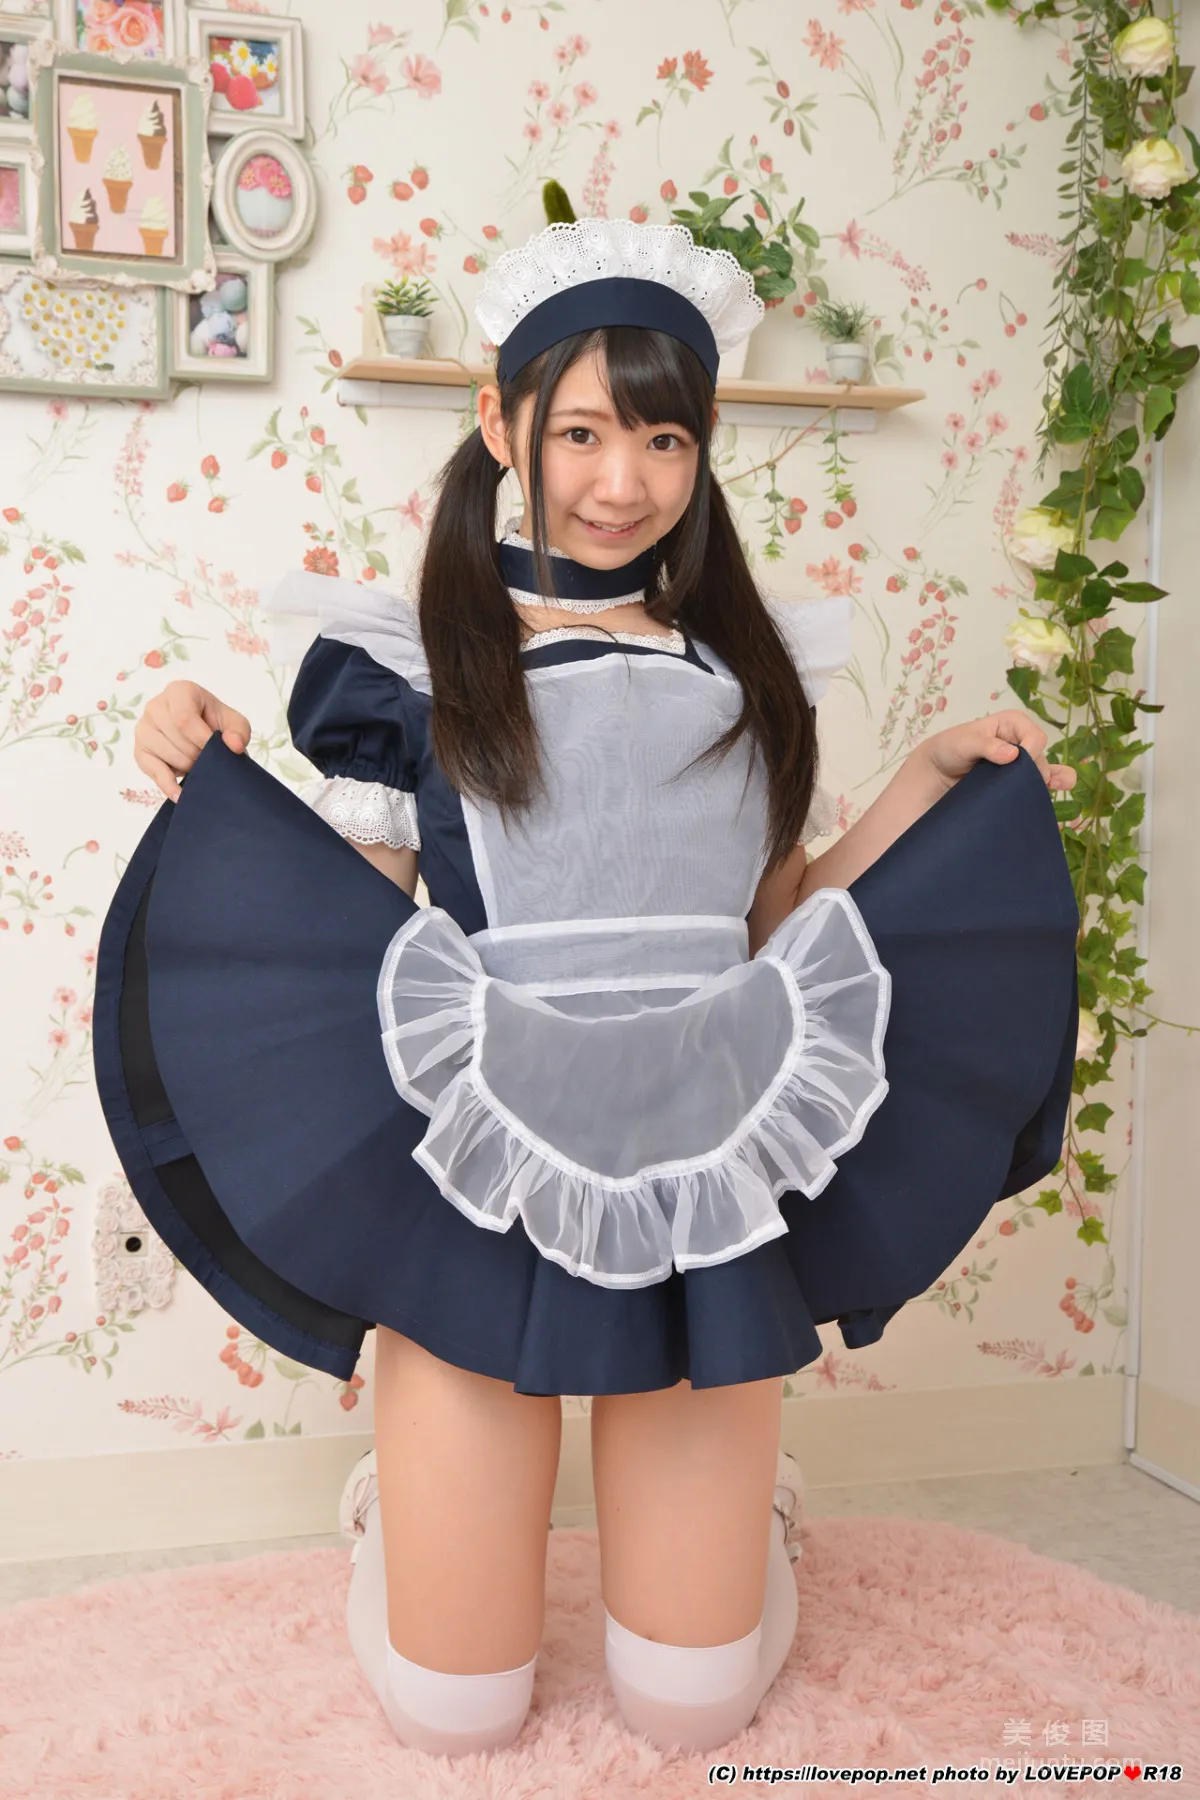 [LOVEPOP] Special Maid Collection - 白井ゆずか Photoset 0129